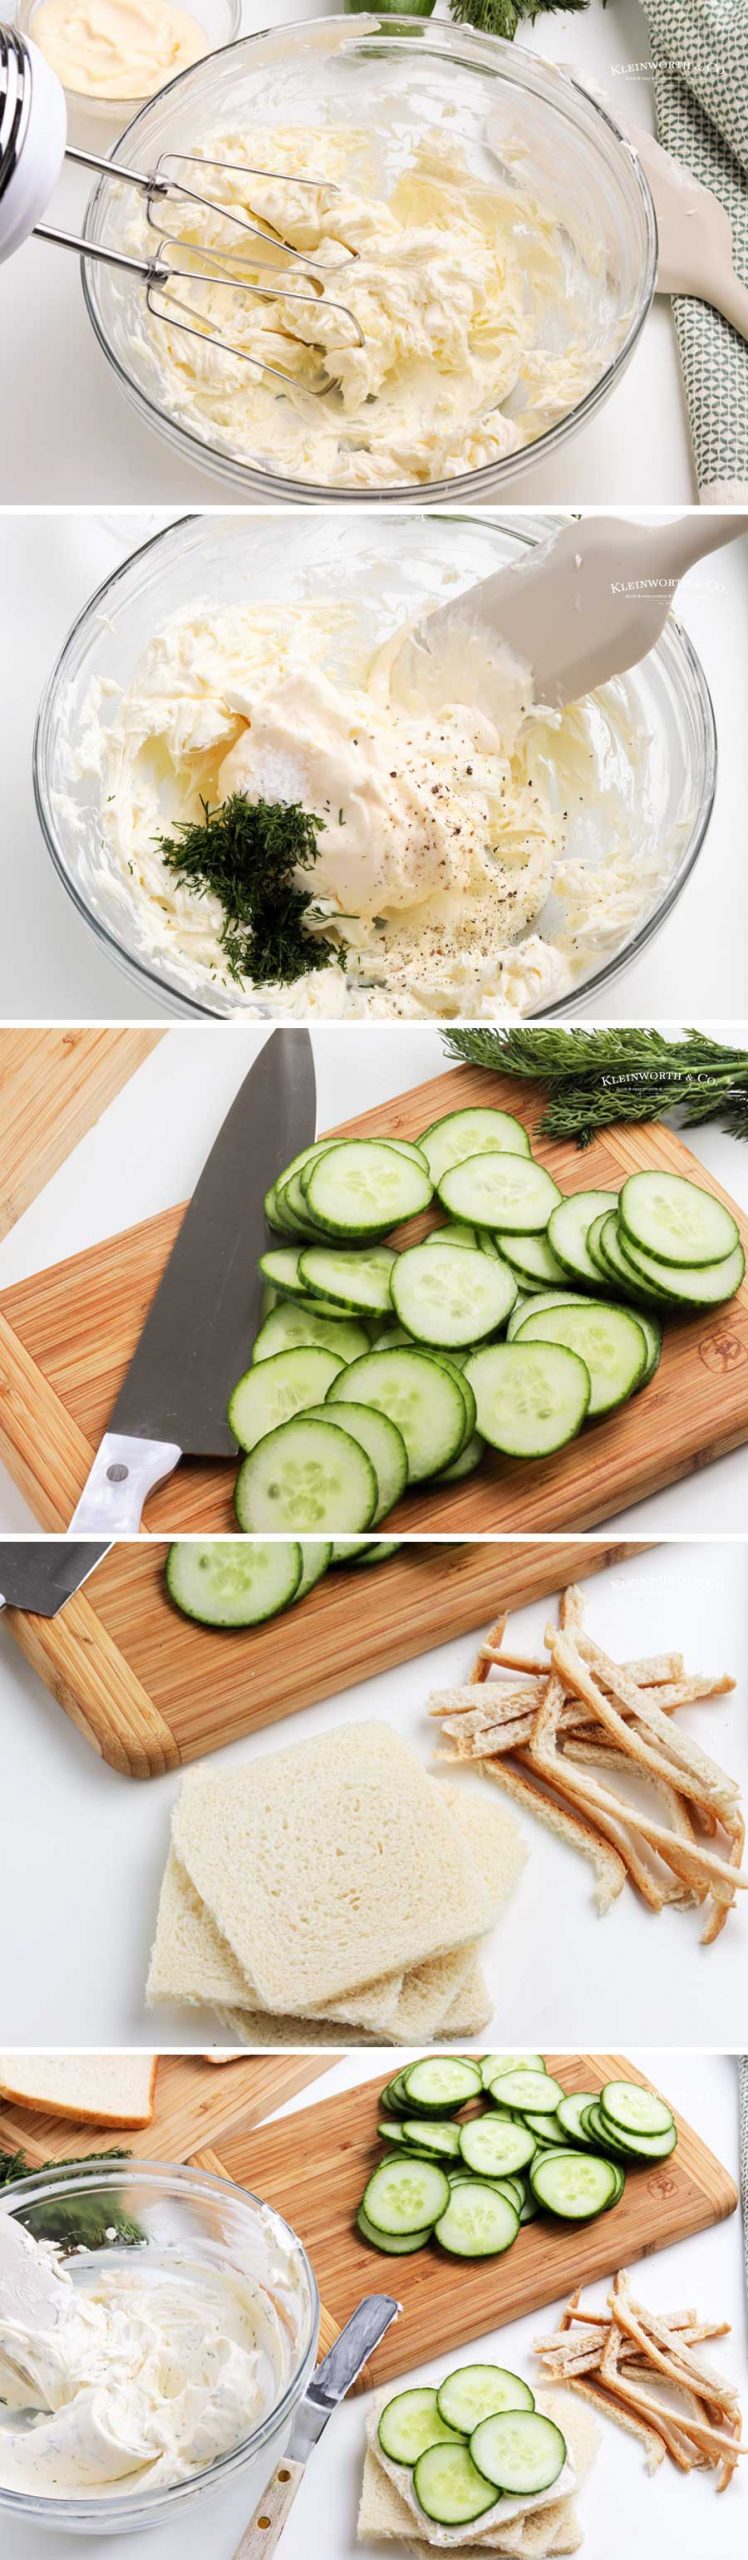 how to make Cucumber Sandwich